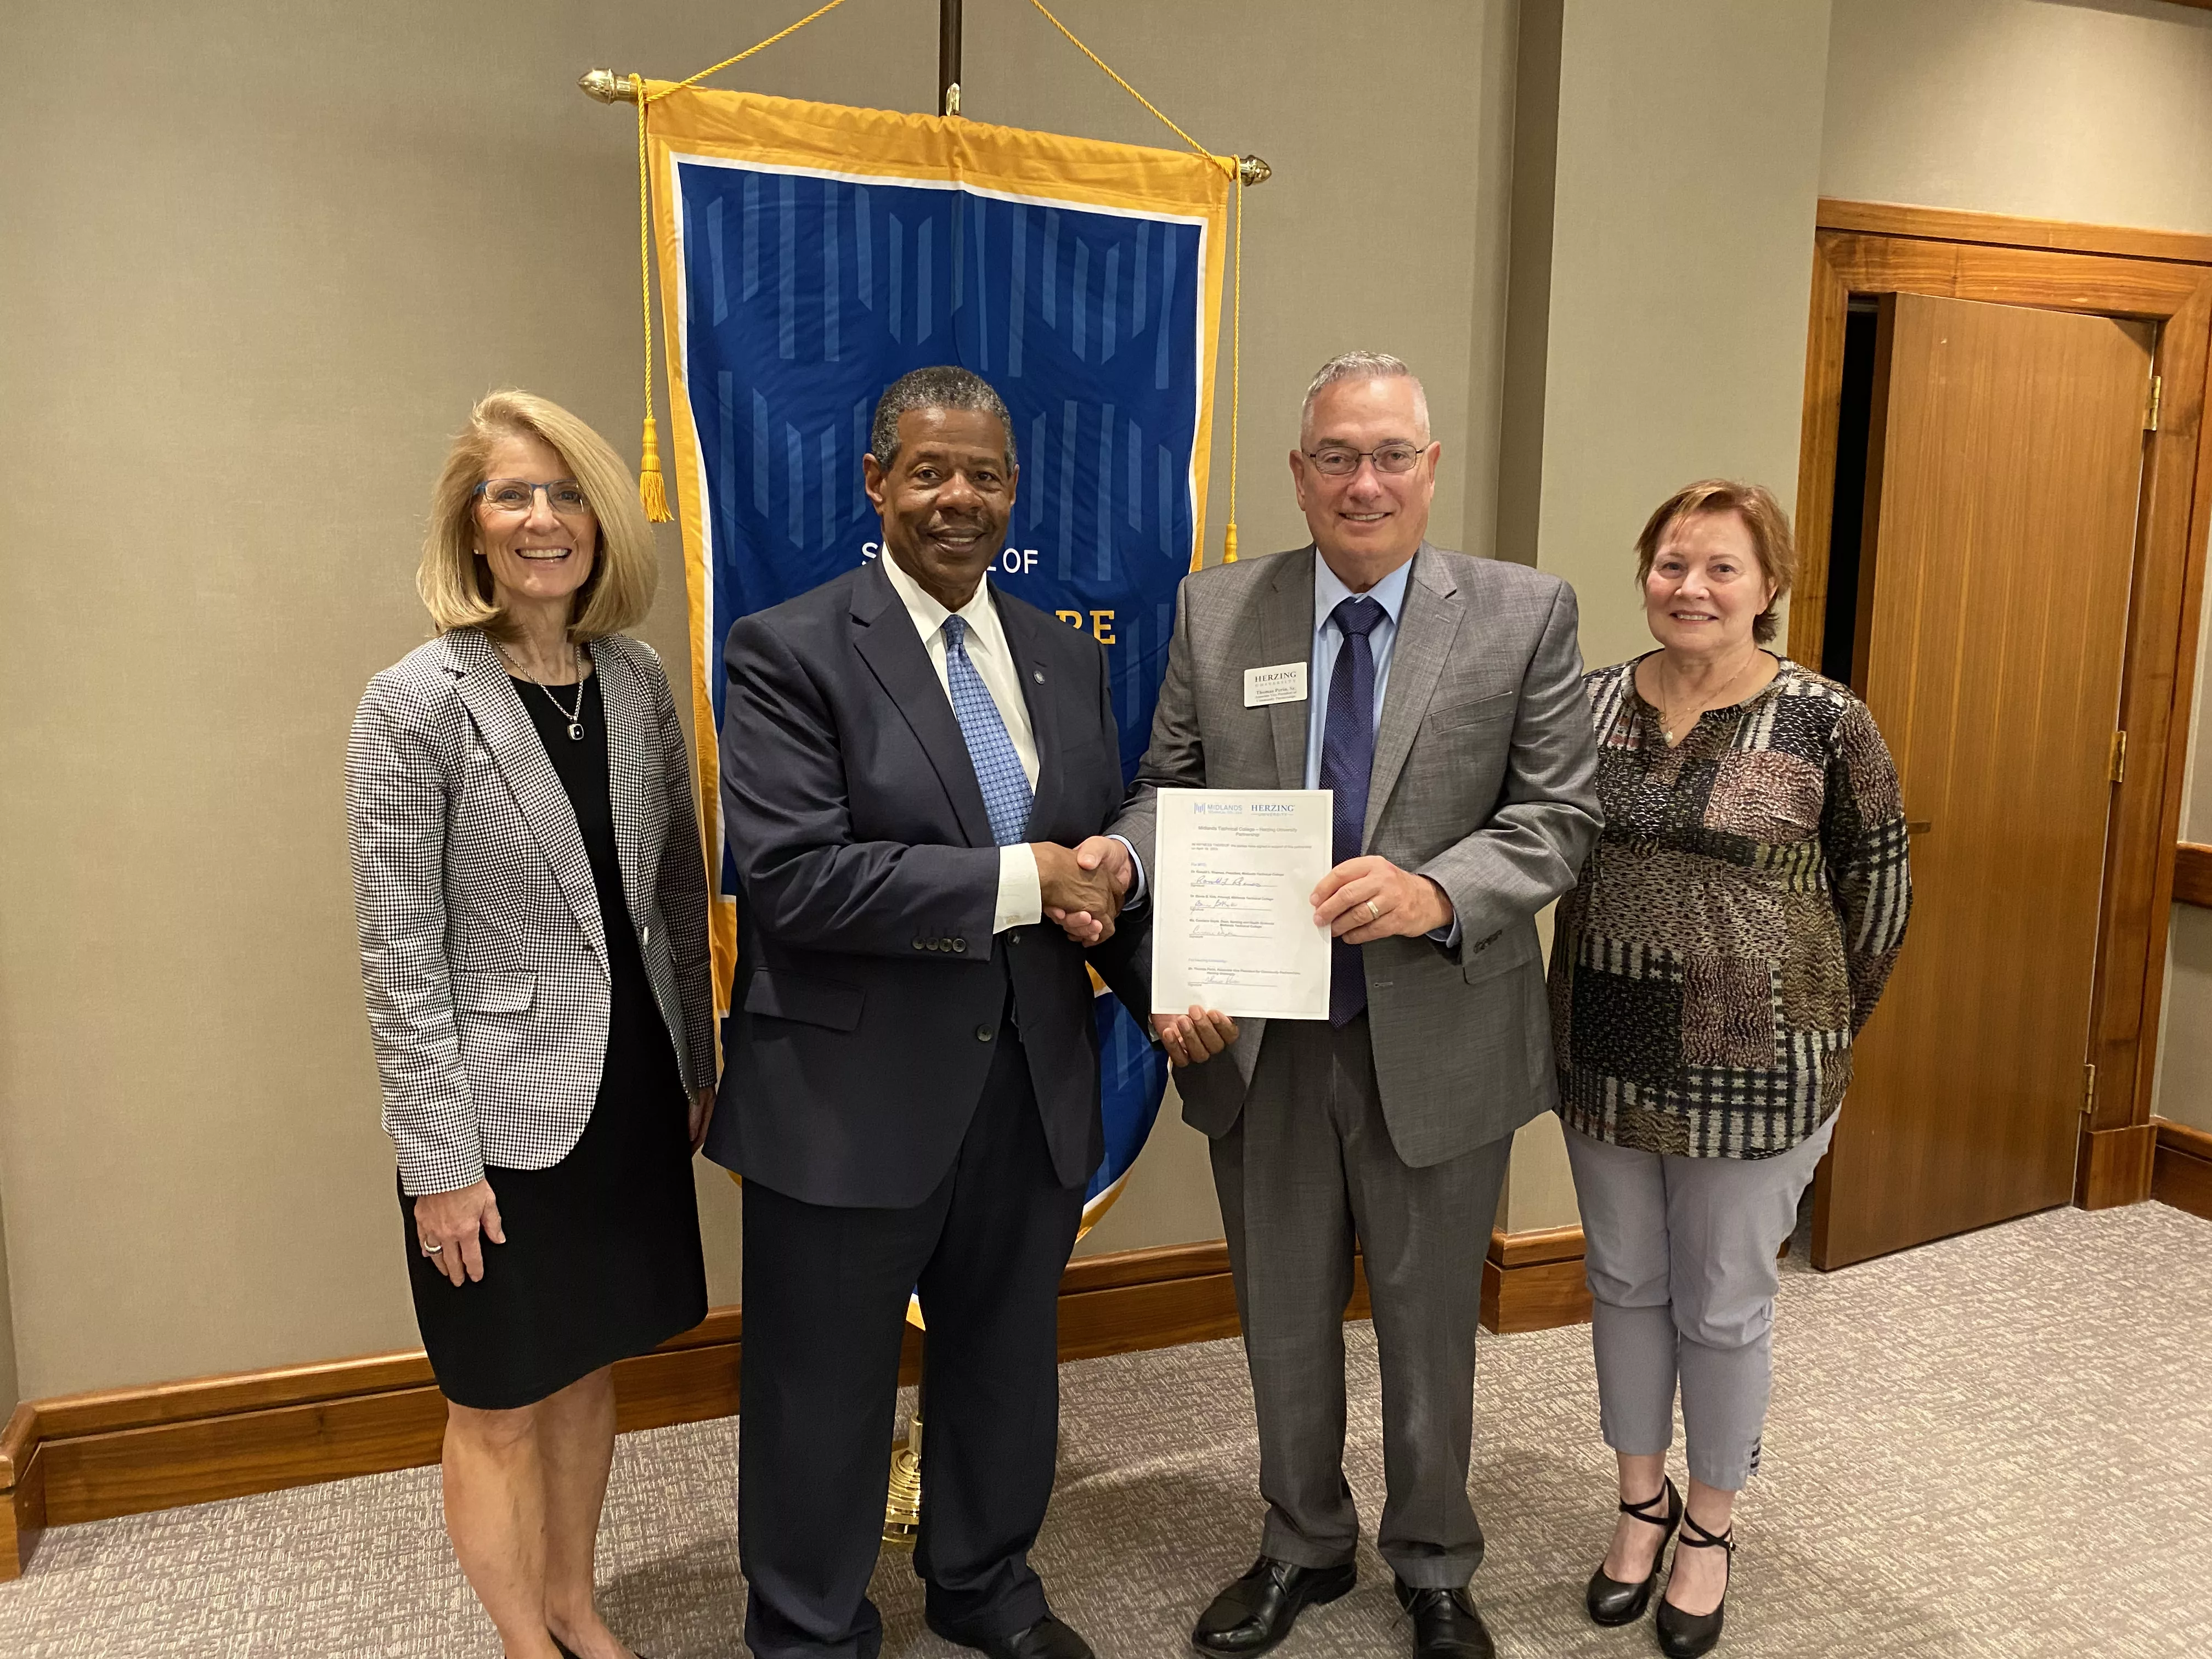 MTC President Dr. Ron Rhames, Provost Barrie Kirk, Dean Candace Doyle, and Herzing Rep, Thomas Perin, pose together with the signed articulation agreement.